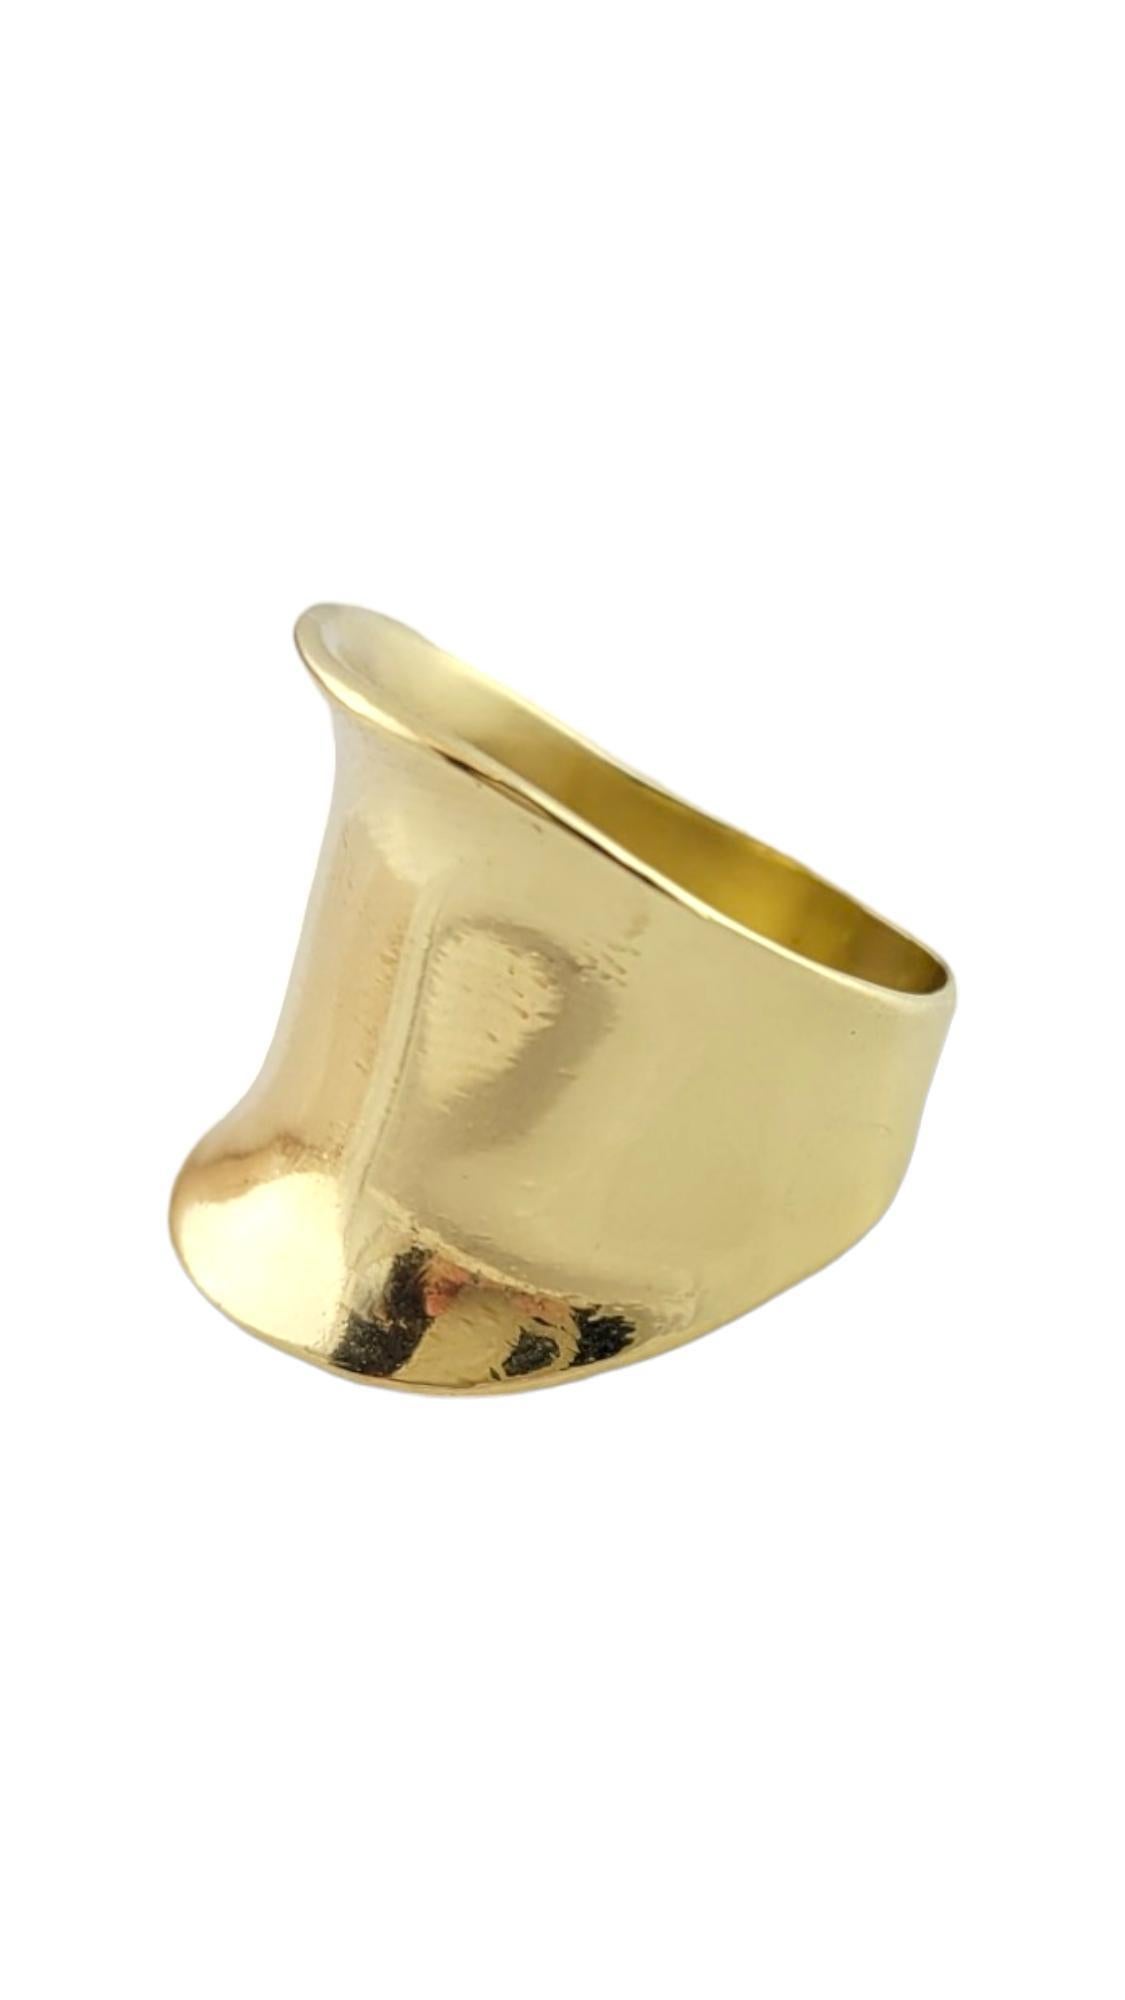 Vintage 18K Yellow Gold Cigar Band by MMA Size 8.75

This gorgeous cigar band is crafted from 28K yellow gold and has a beautiful finish!

Ring size: 8.75
Sank: 5.30mm
Front: 20.36mm

Weight: 11.0 g/ 7.1 dwt

Hallmark: MMA 750

Very good condition,